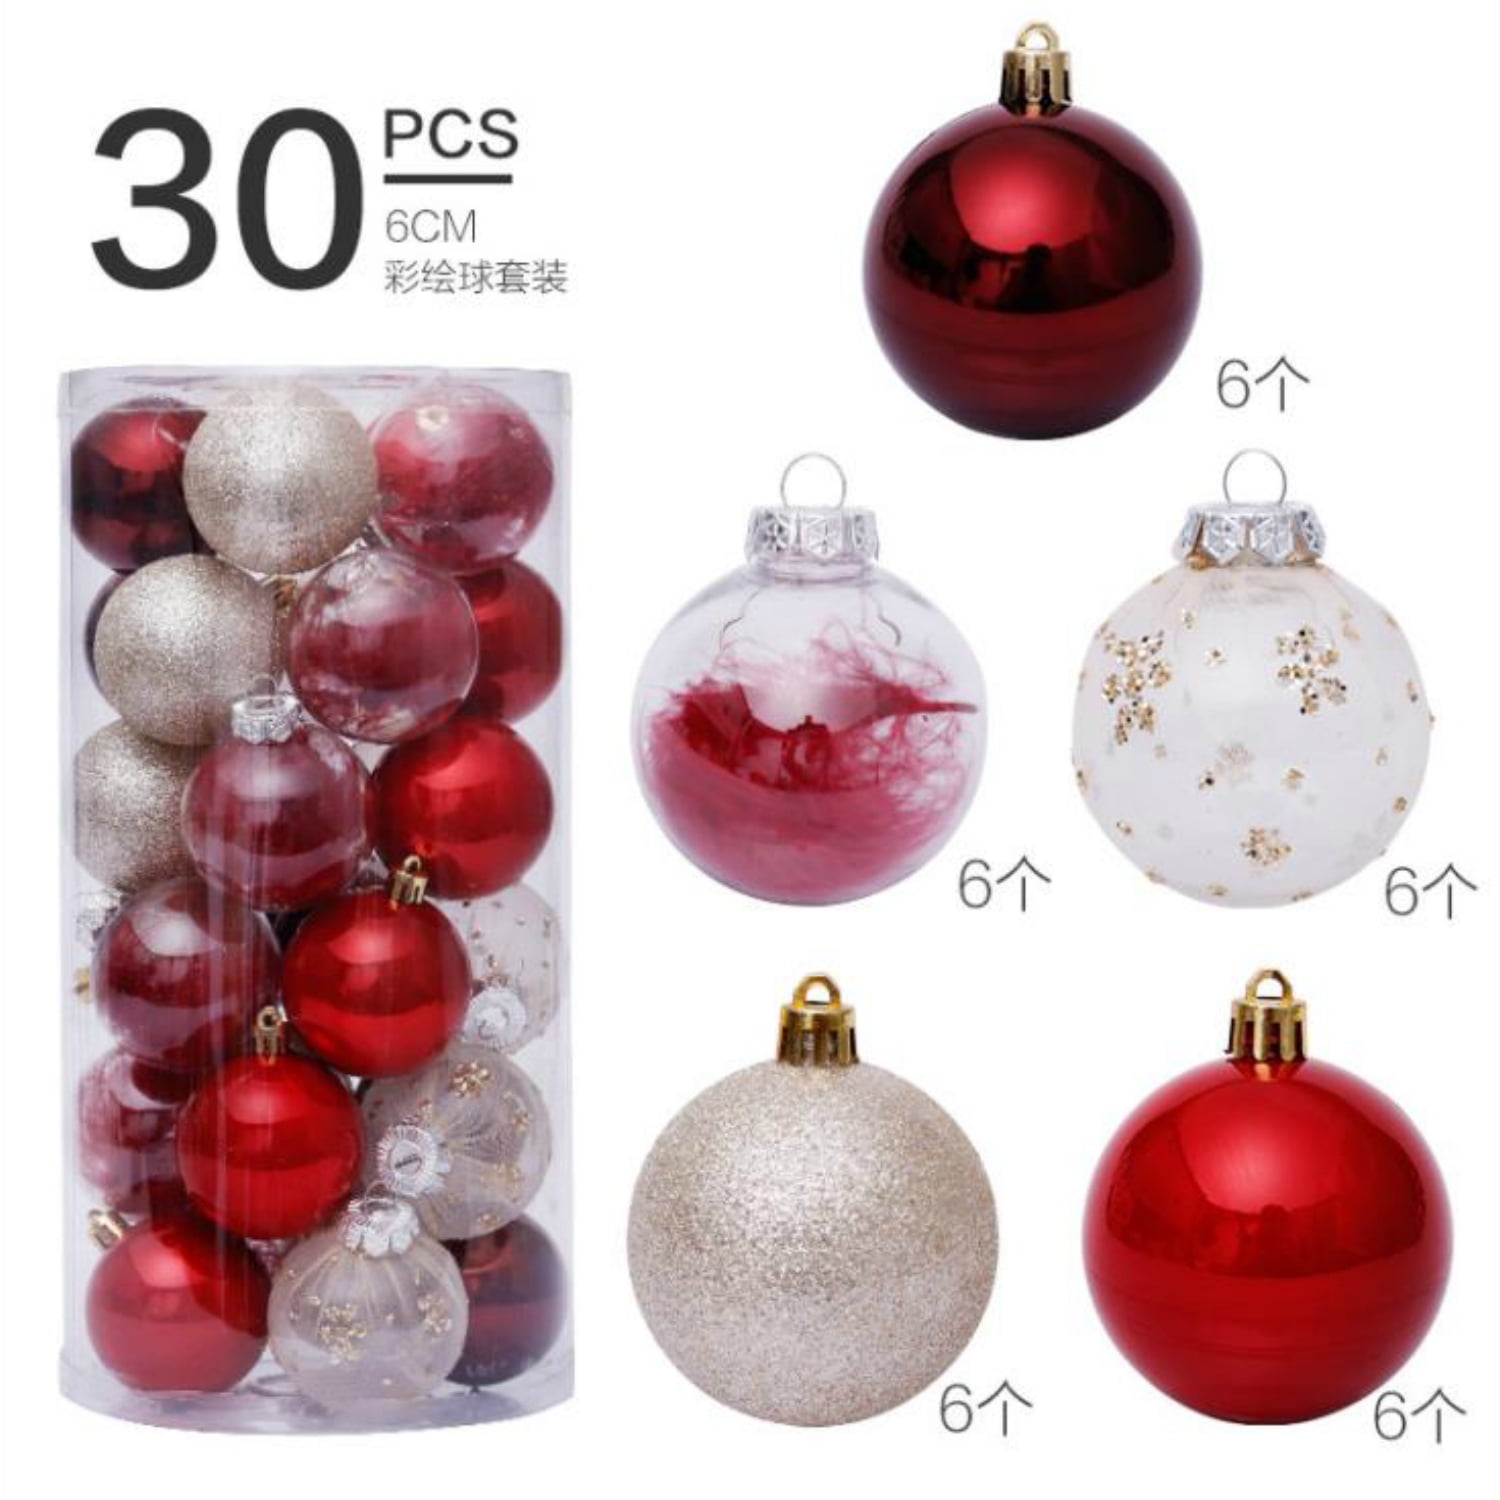 Christmas Ball Ornaments 3.9 Shatterproof Christmas Tree Decorations Set Large Champagne Christmas Ornaments Balls for Xmas Trees Wedding Party Home Decor 8 Pcs 4 Styles in 2 Sizes